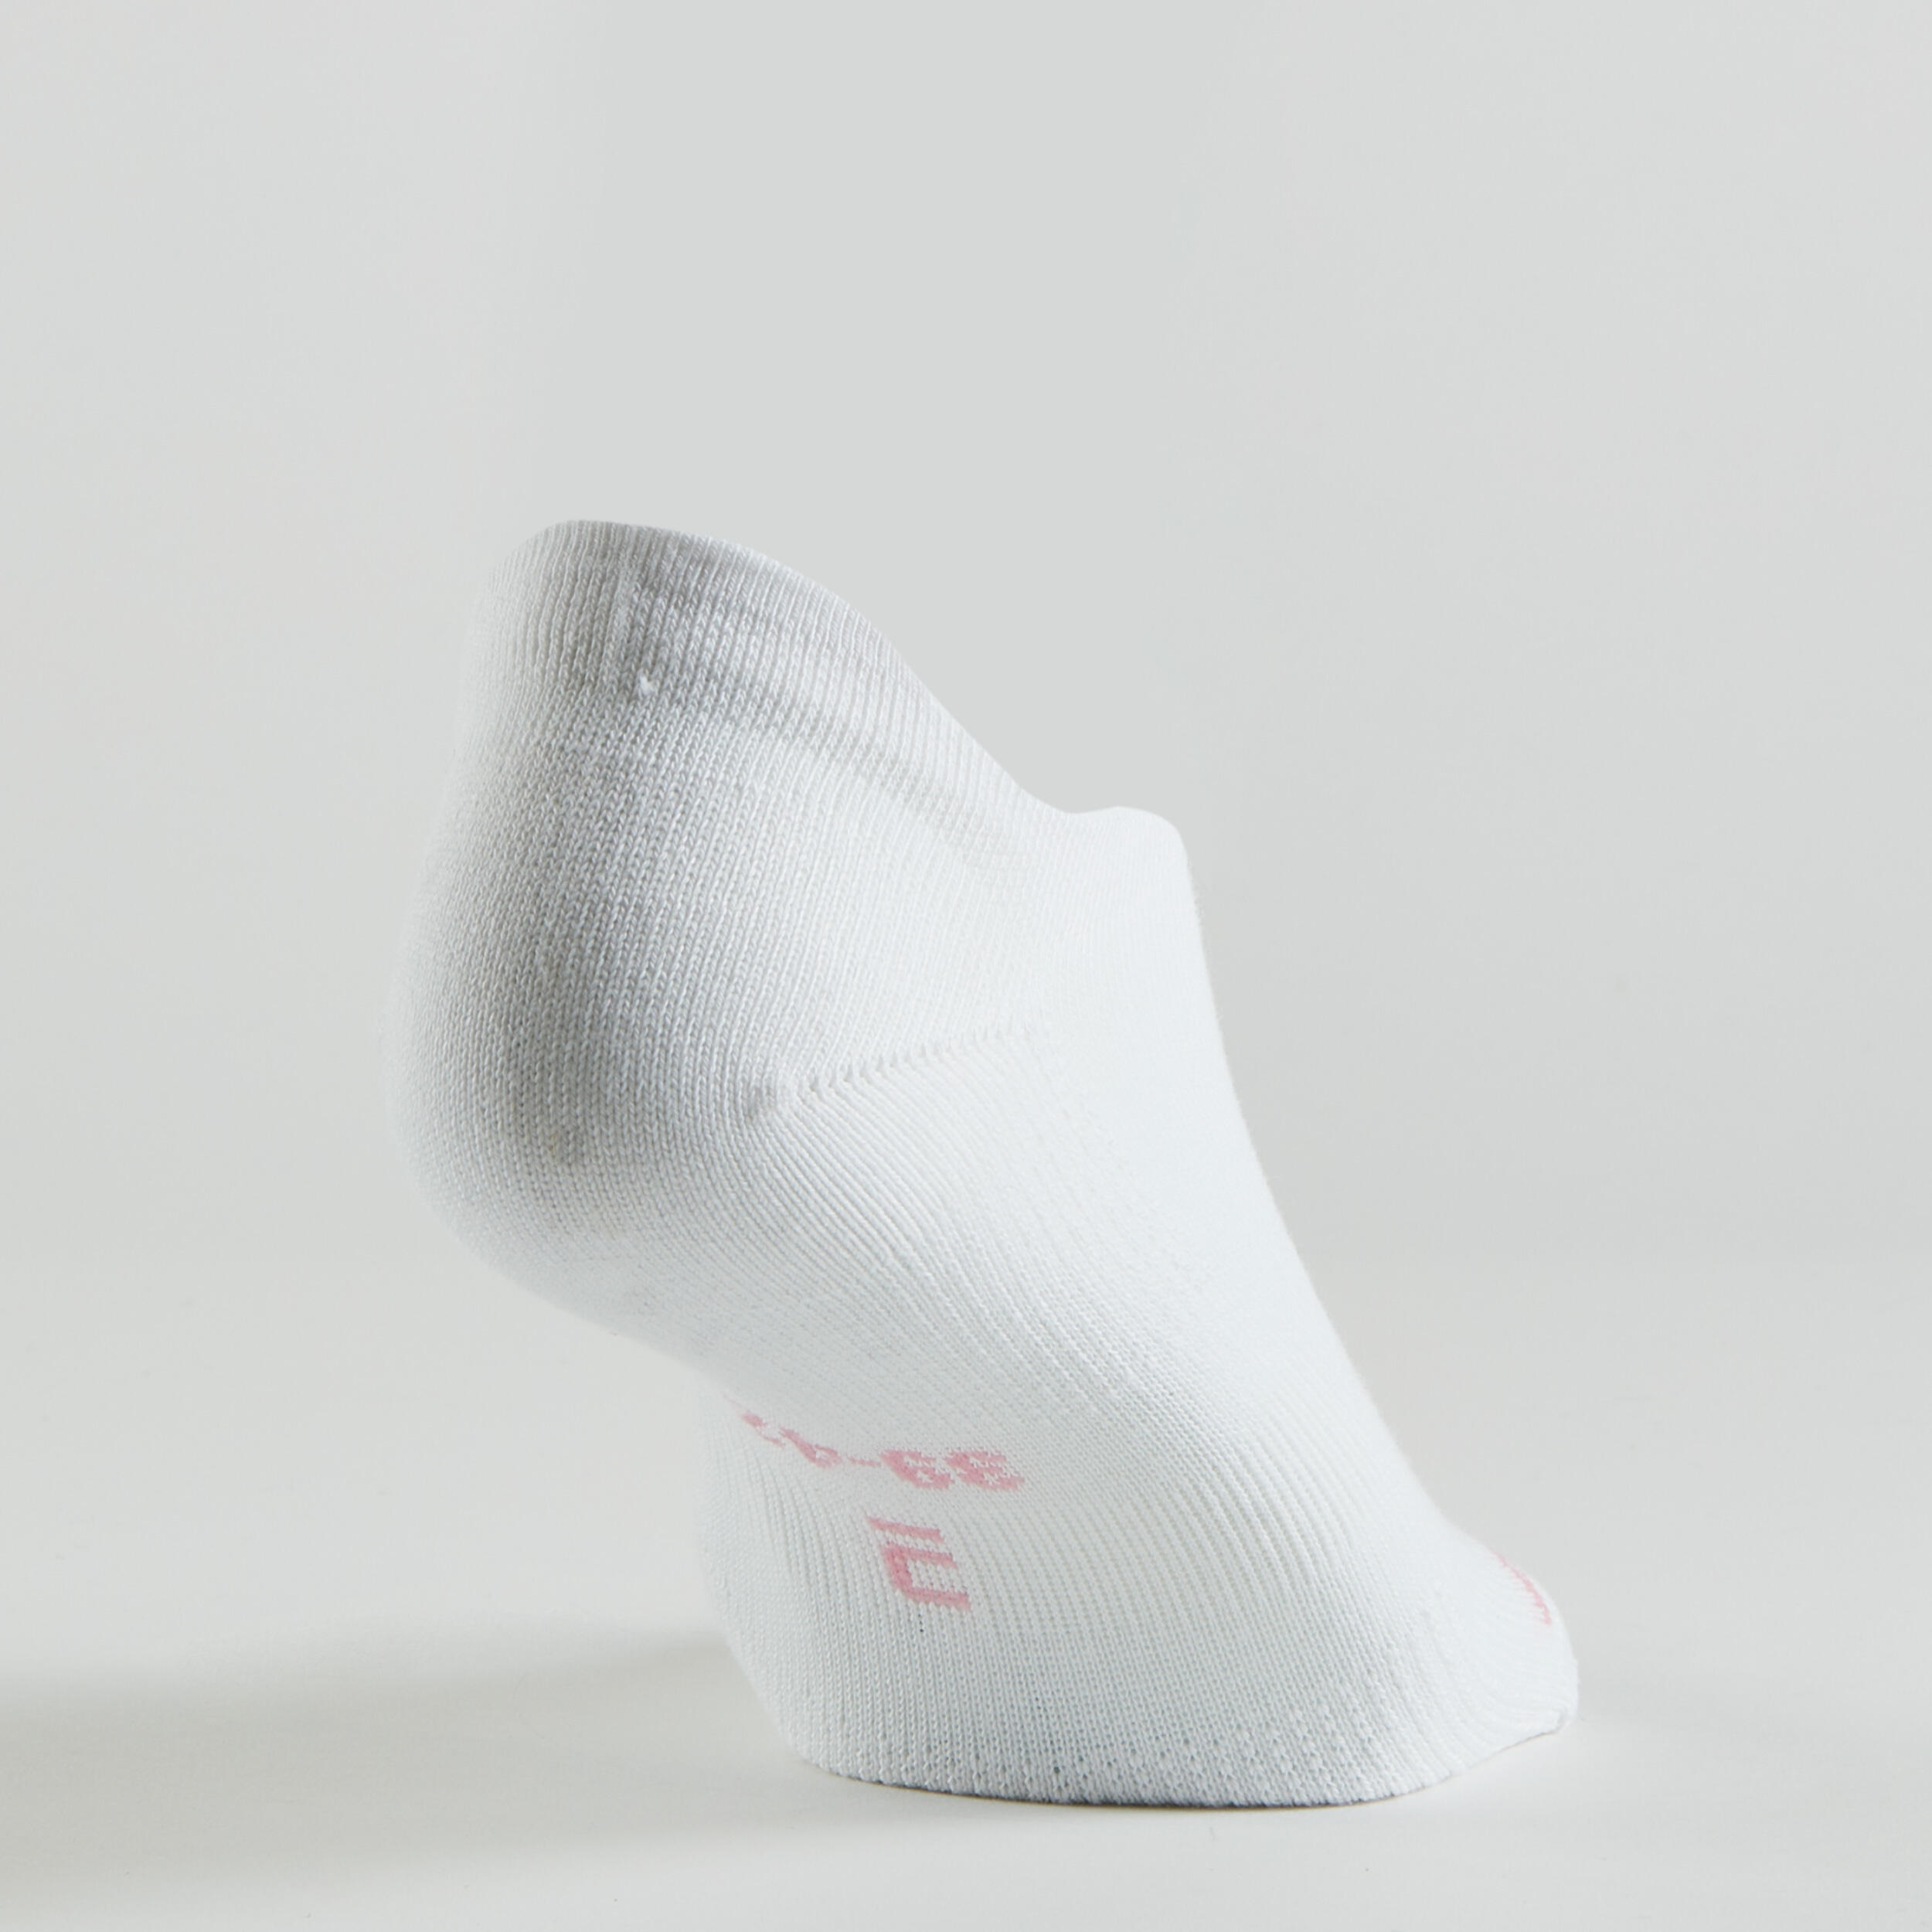 Low Sports Socks RS 160 Tri-Pack - Pink/White/China Blue 6/14